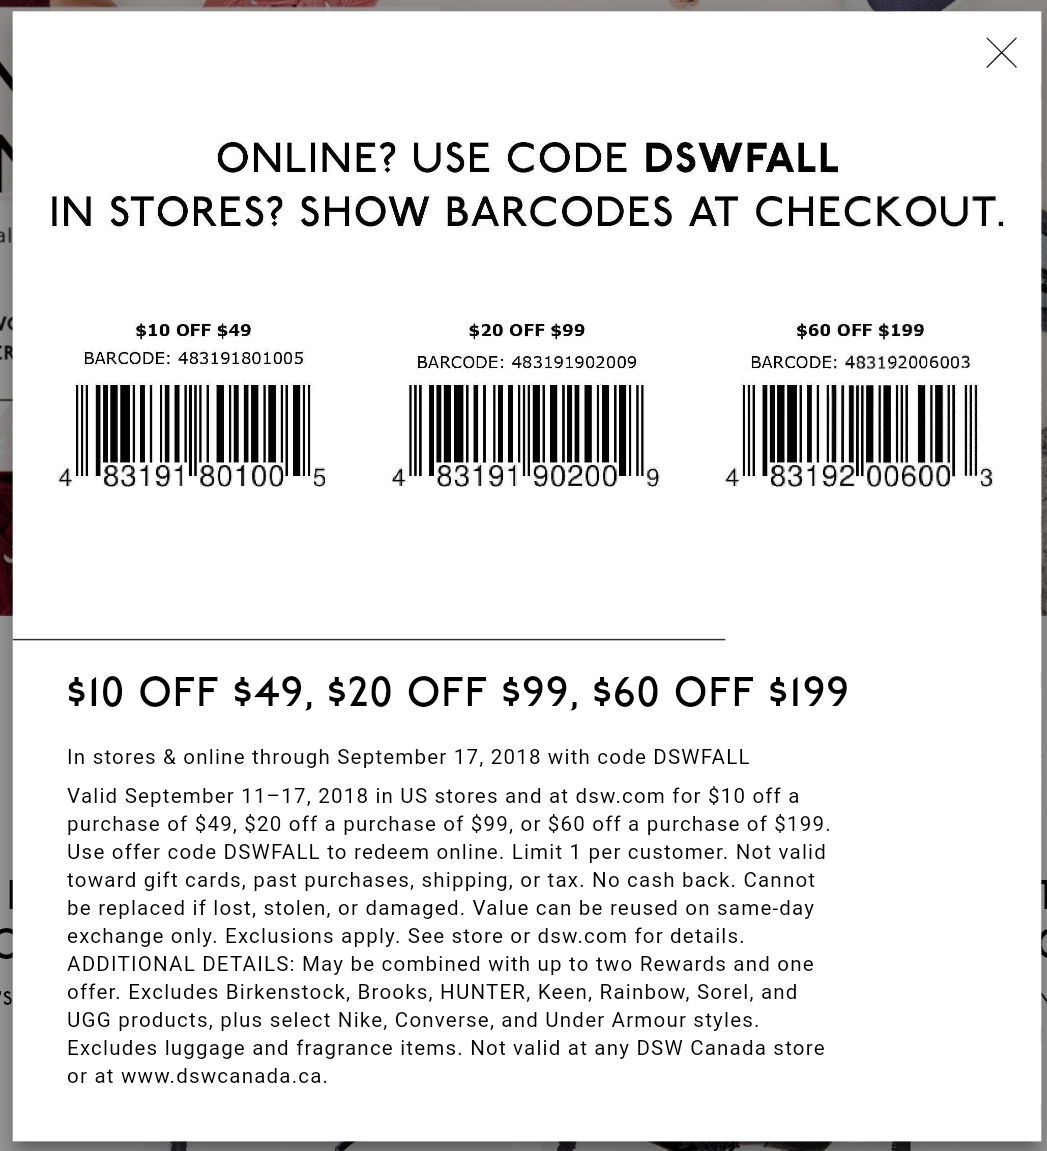 Dsw Printable Coupon - Printable Coupons 2019 - Free Printable Coupons For Dsw Shoes